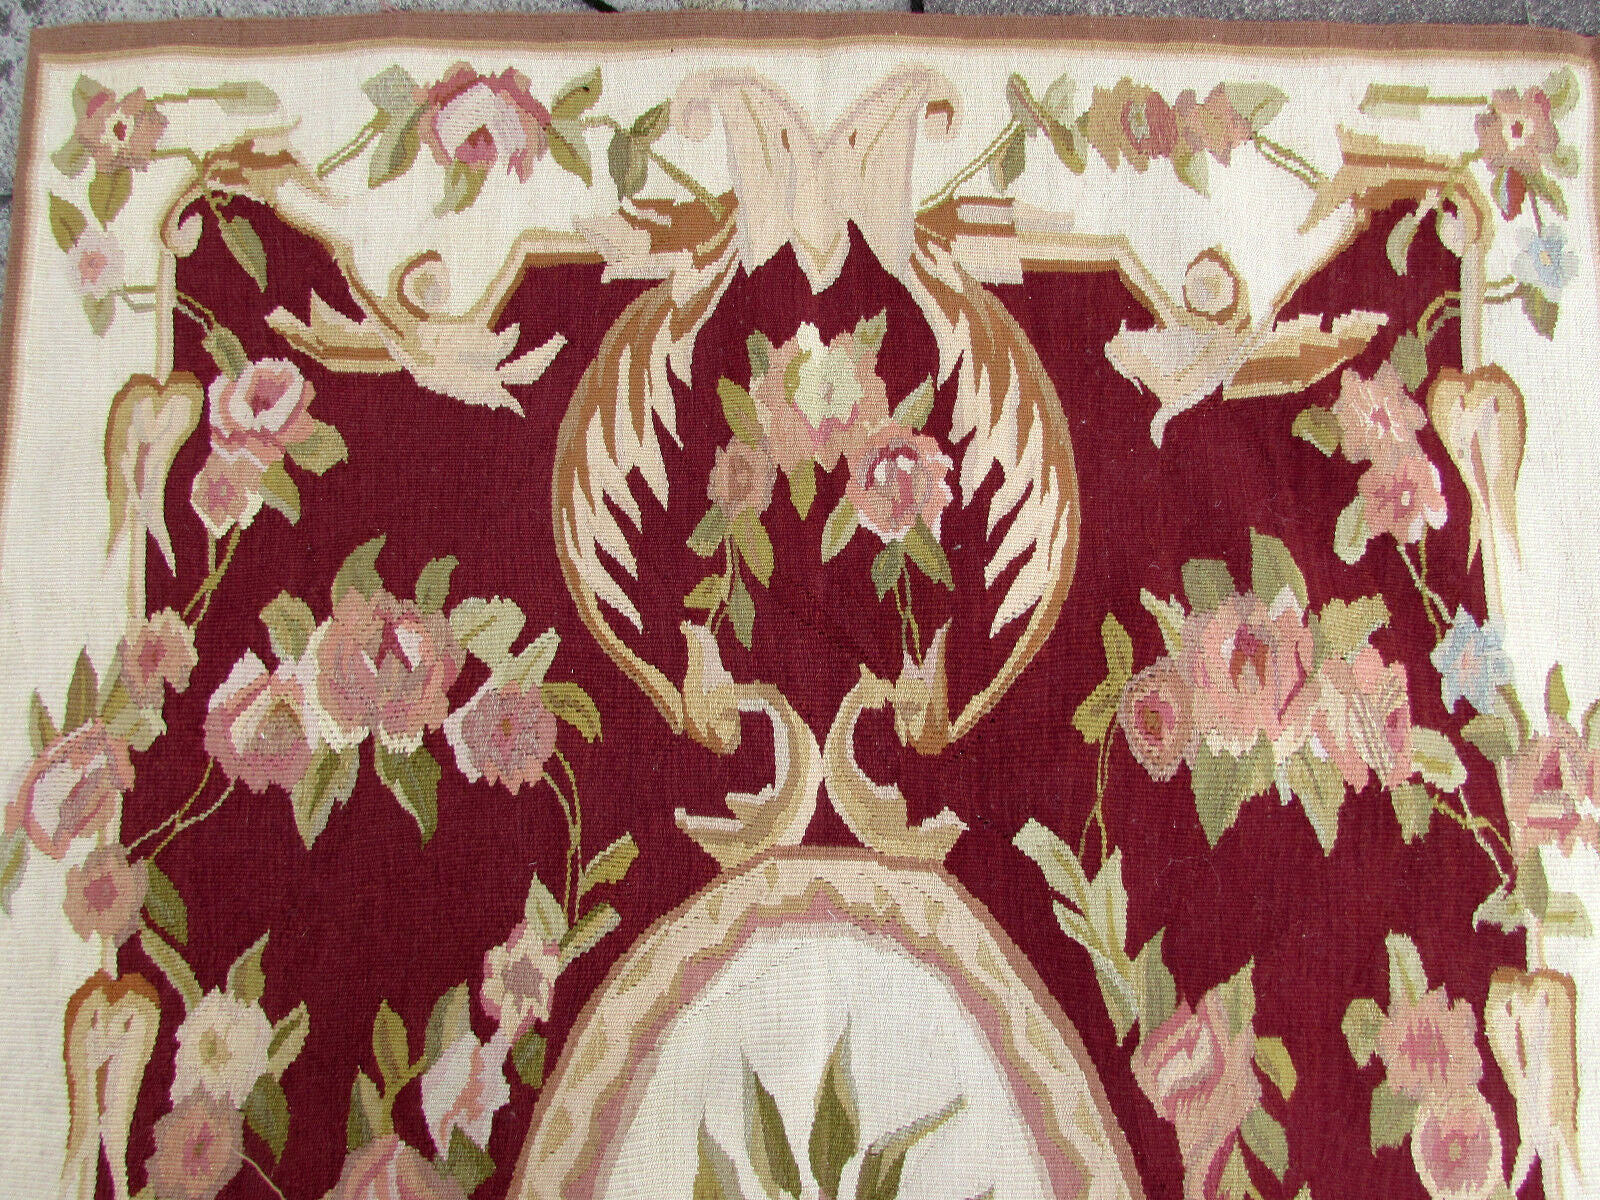 Close-up of intricate Aubusson rug design in beige and burgundy colors.